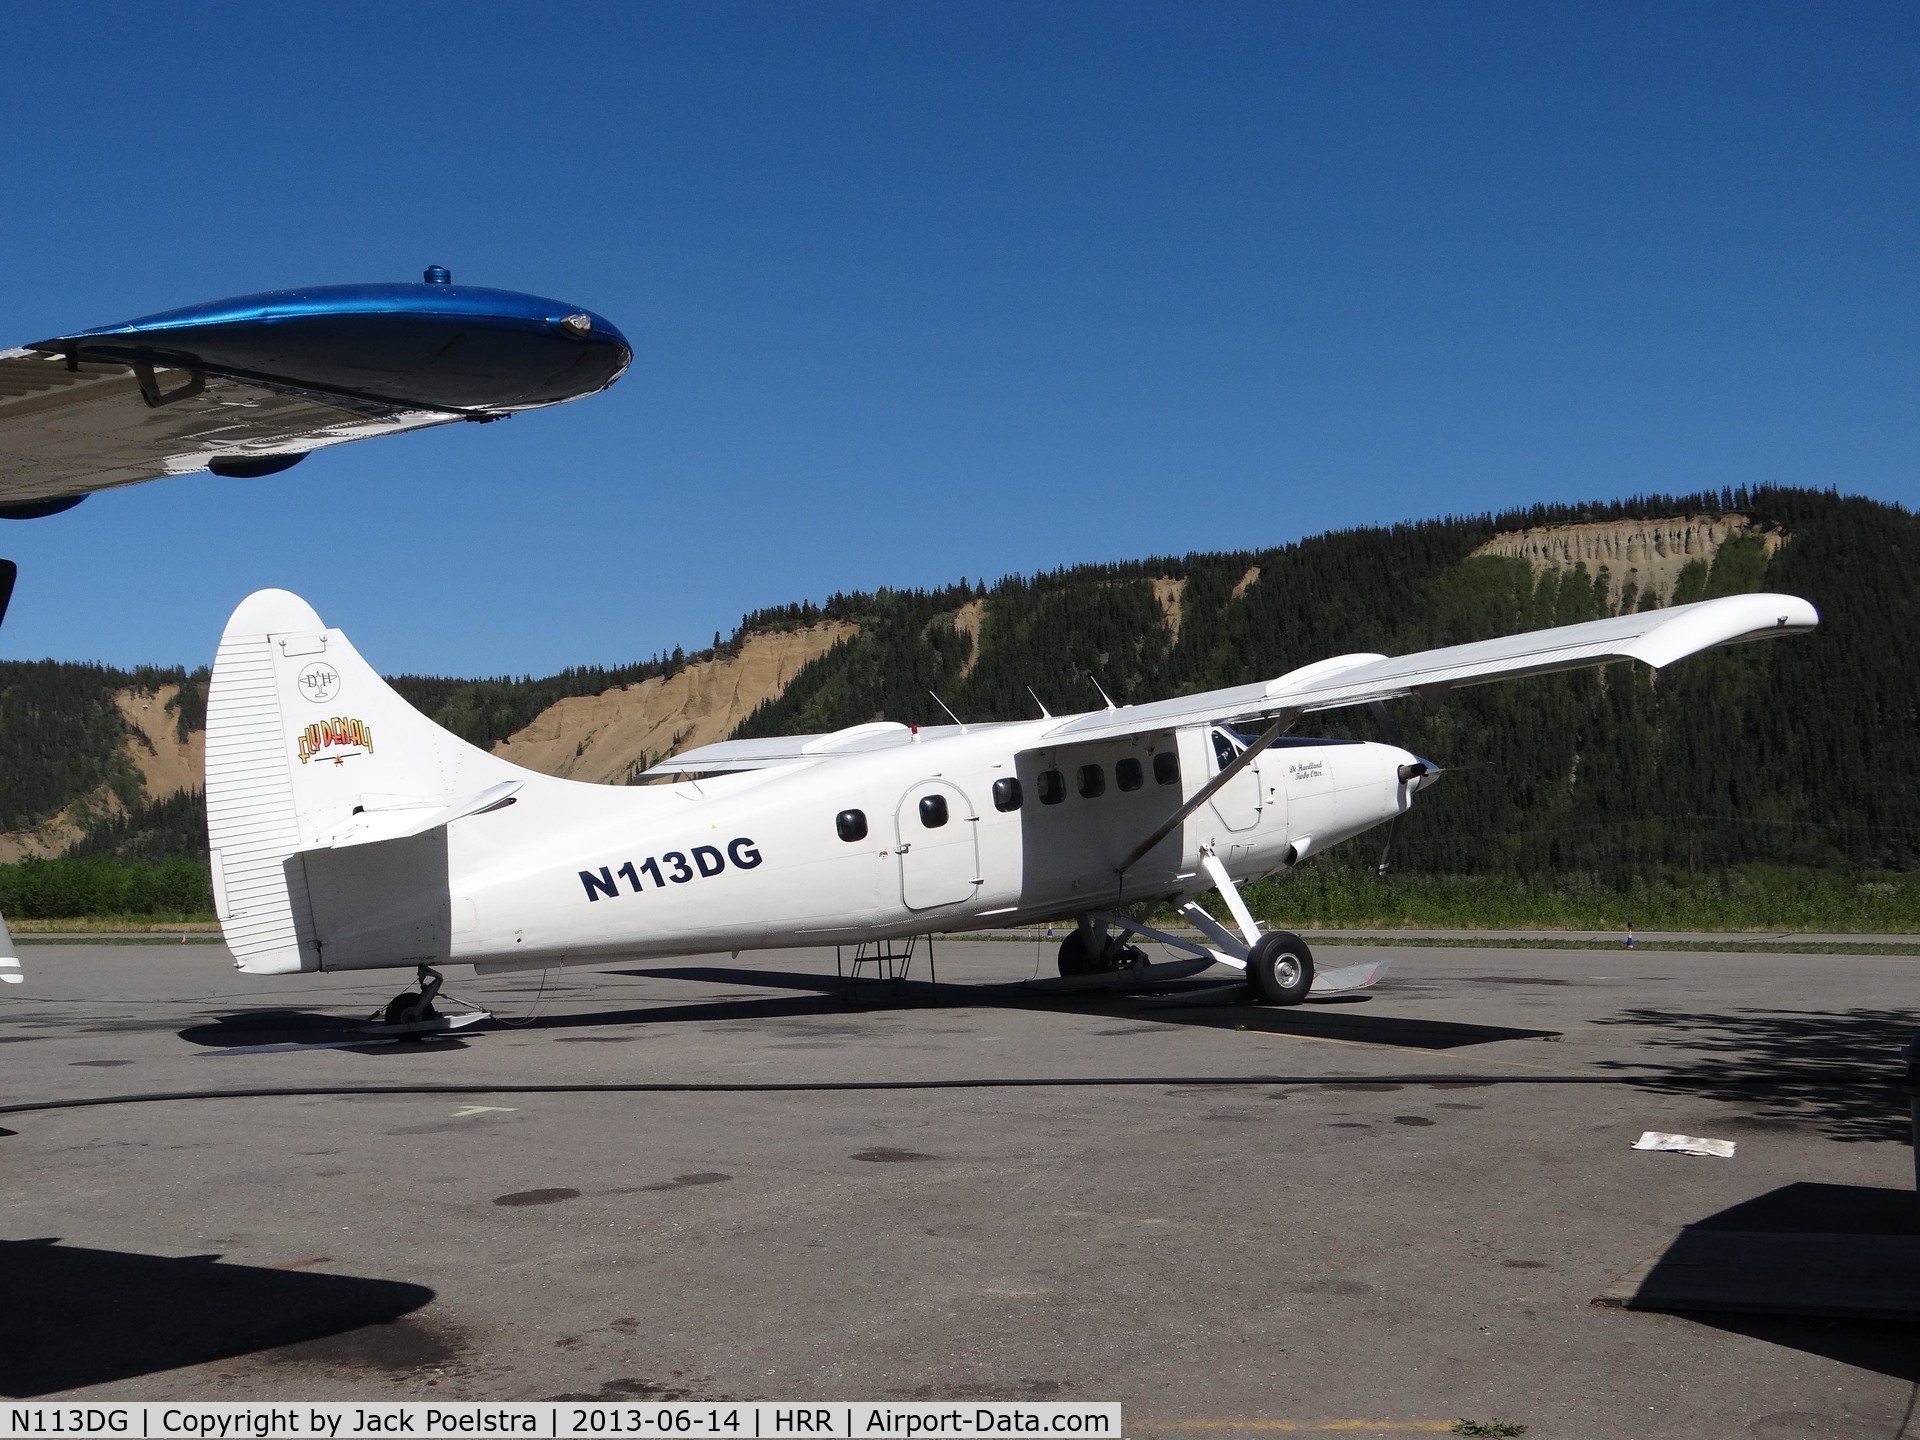 N113DG, 1960 De Havilland Canada DHC-3 Turbo Otter C/N 397, Turbo Otter of Fly Denali at Healy River airport AK